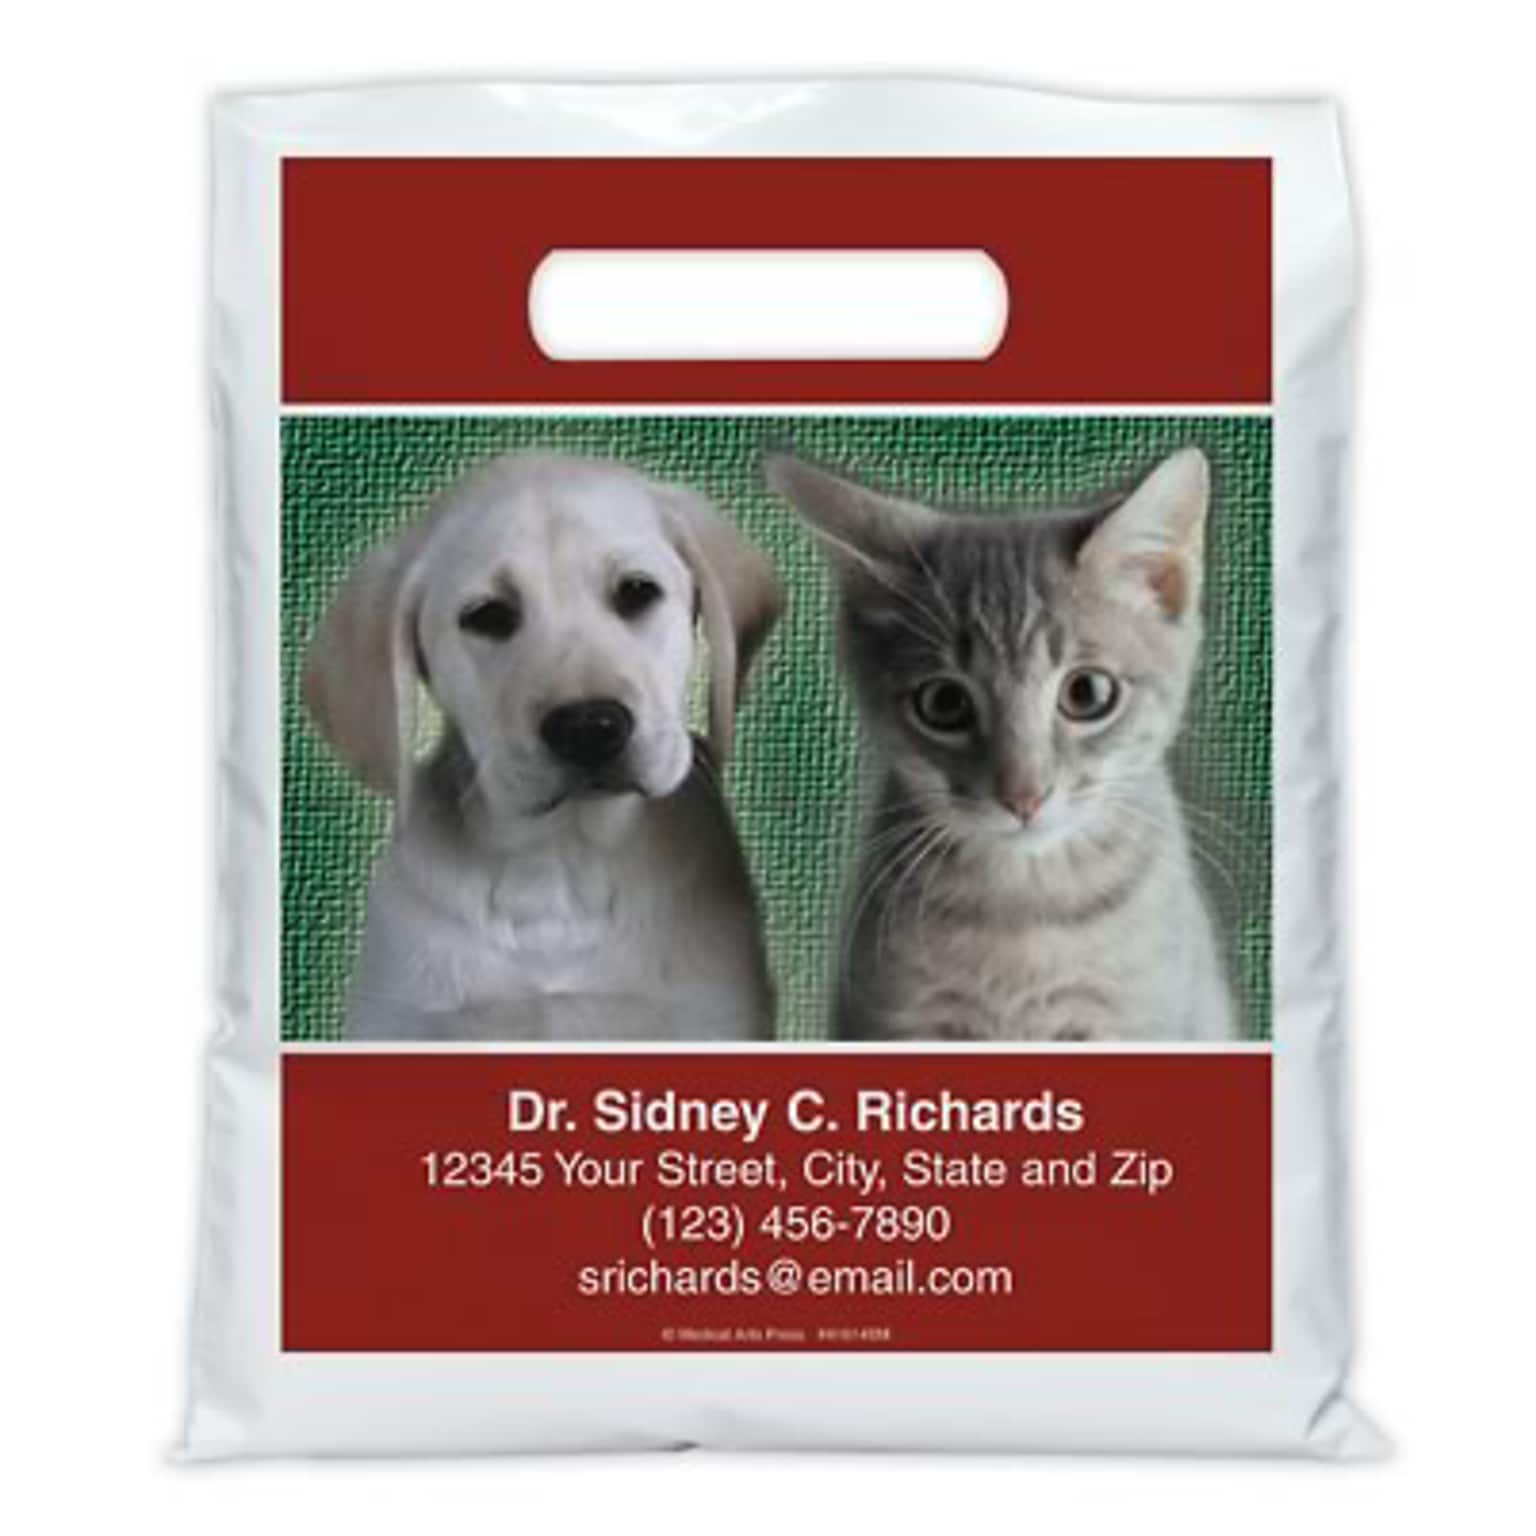 Medical Arts Press® Veterinary Personalized Full-Color Bags; 7-1/2x9, White Dog/Cat, 100 Bags, (41614)